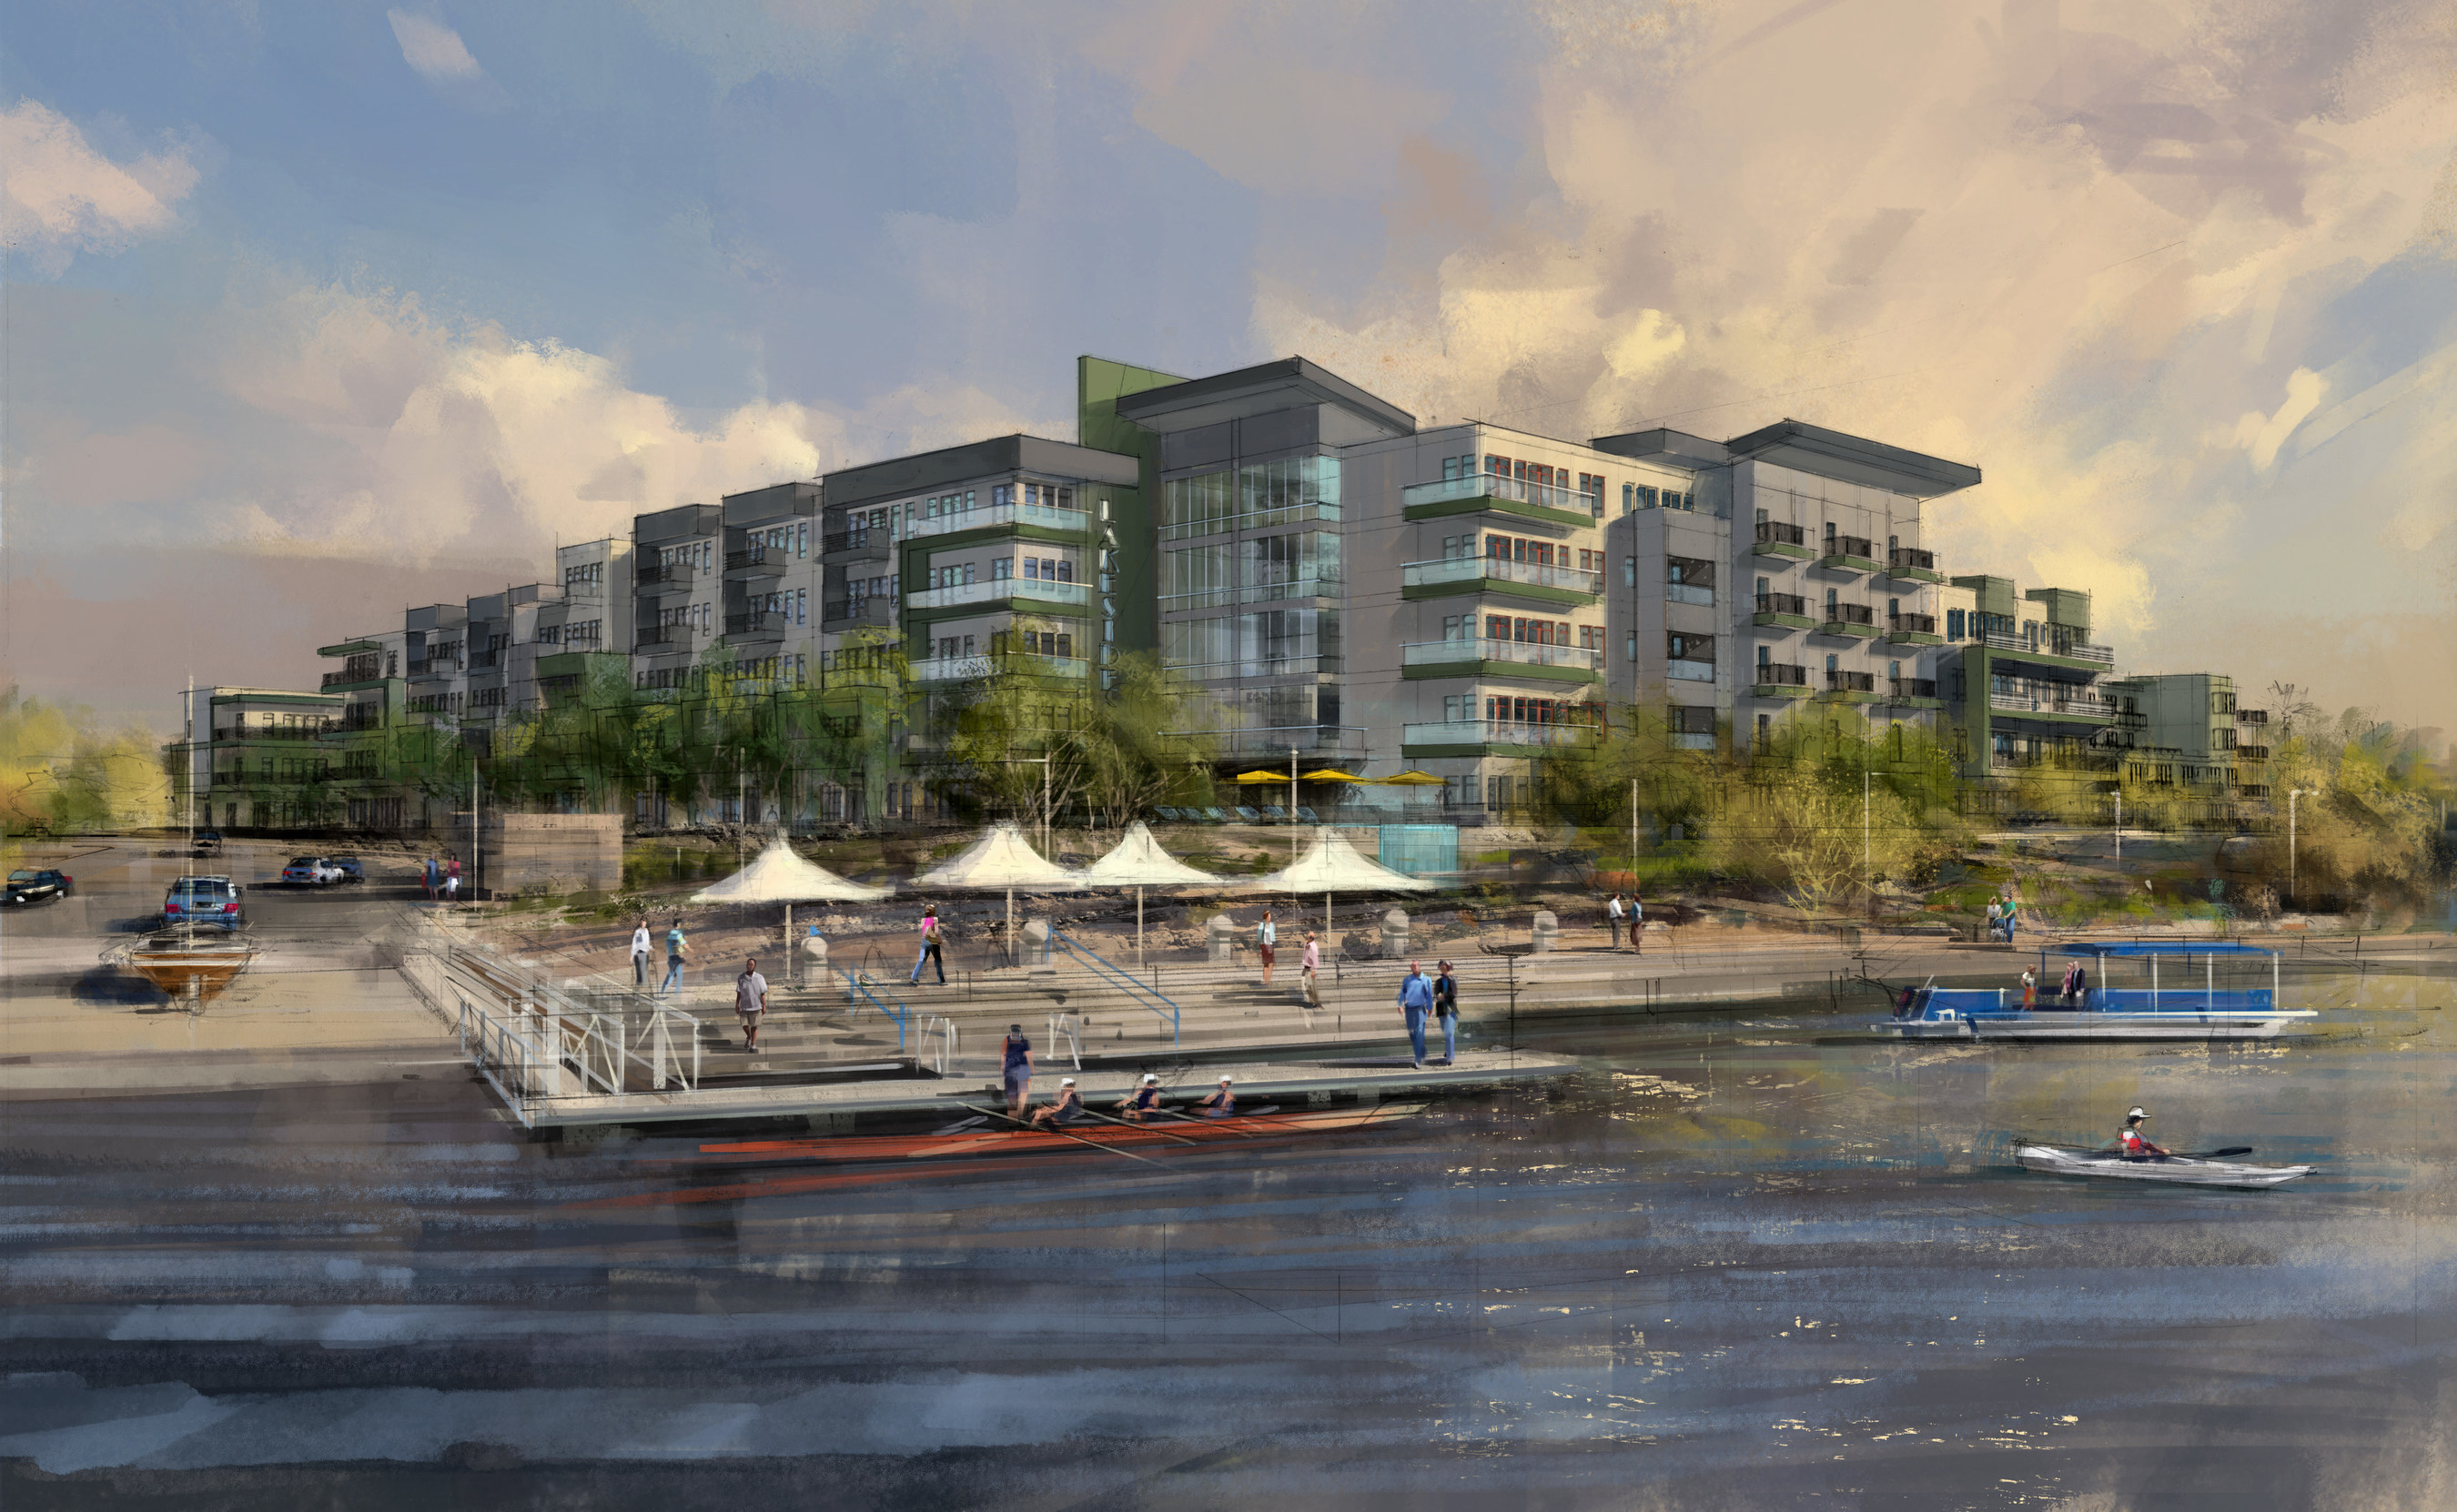 Transwestern Development Co. broke ground on VELA at Town Lake, a luxury multifamily community in Tempe, Arizona. The 290-unit project is scheduled for delivery in September 2016. The lake-front property will attract young professionals seeking an amenity-rich lifestyle near major employment and retail hubs. The project is adjacent to the Tempe Town Lake marina and directly across from the new regional headquarters of State Farm and Sun Devil Stadium, the football stadium for Arizona State University...